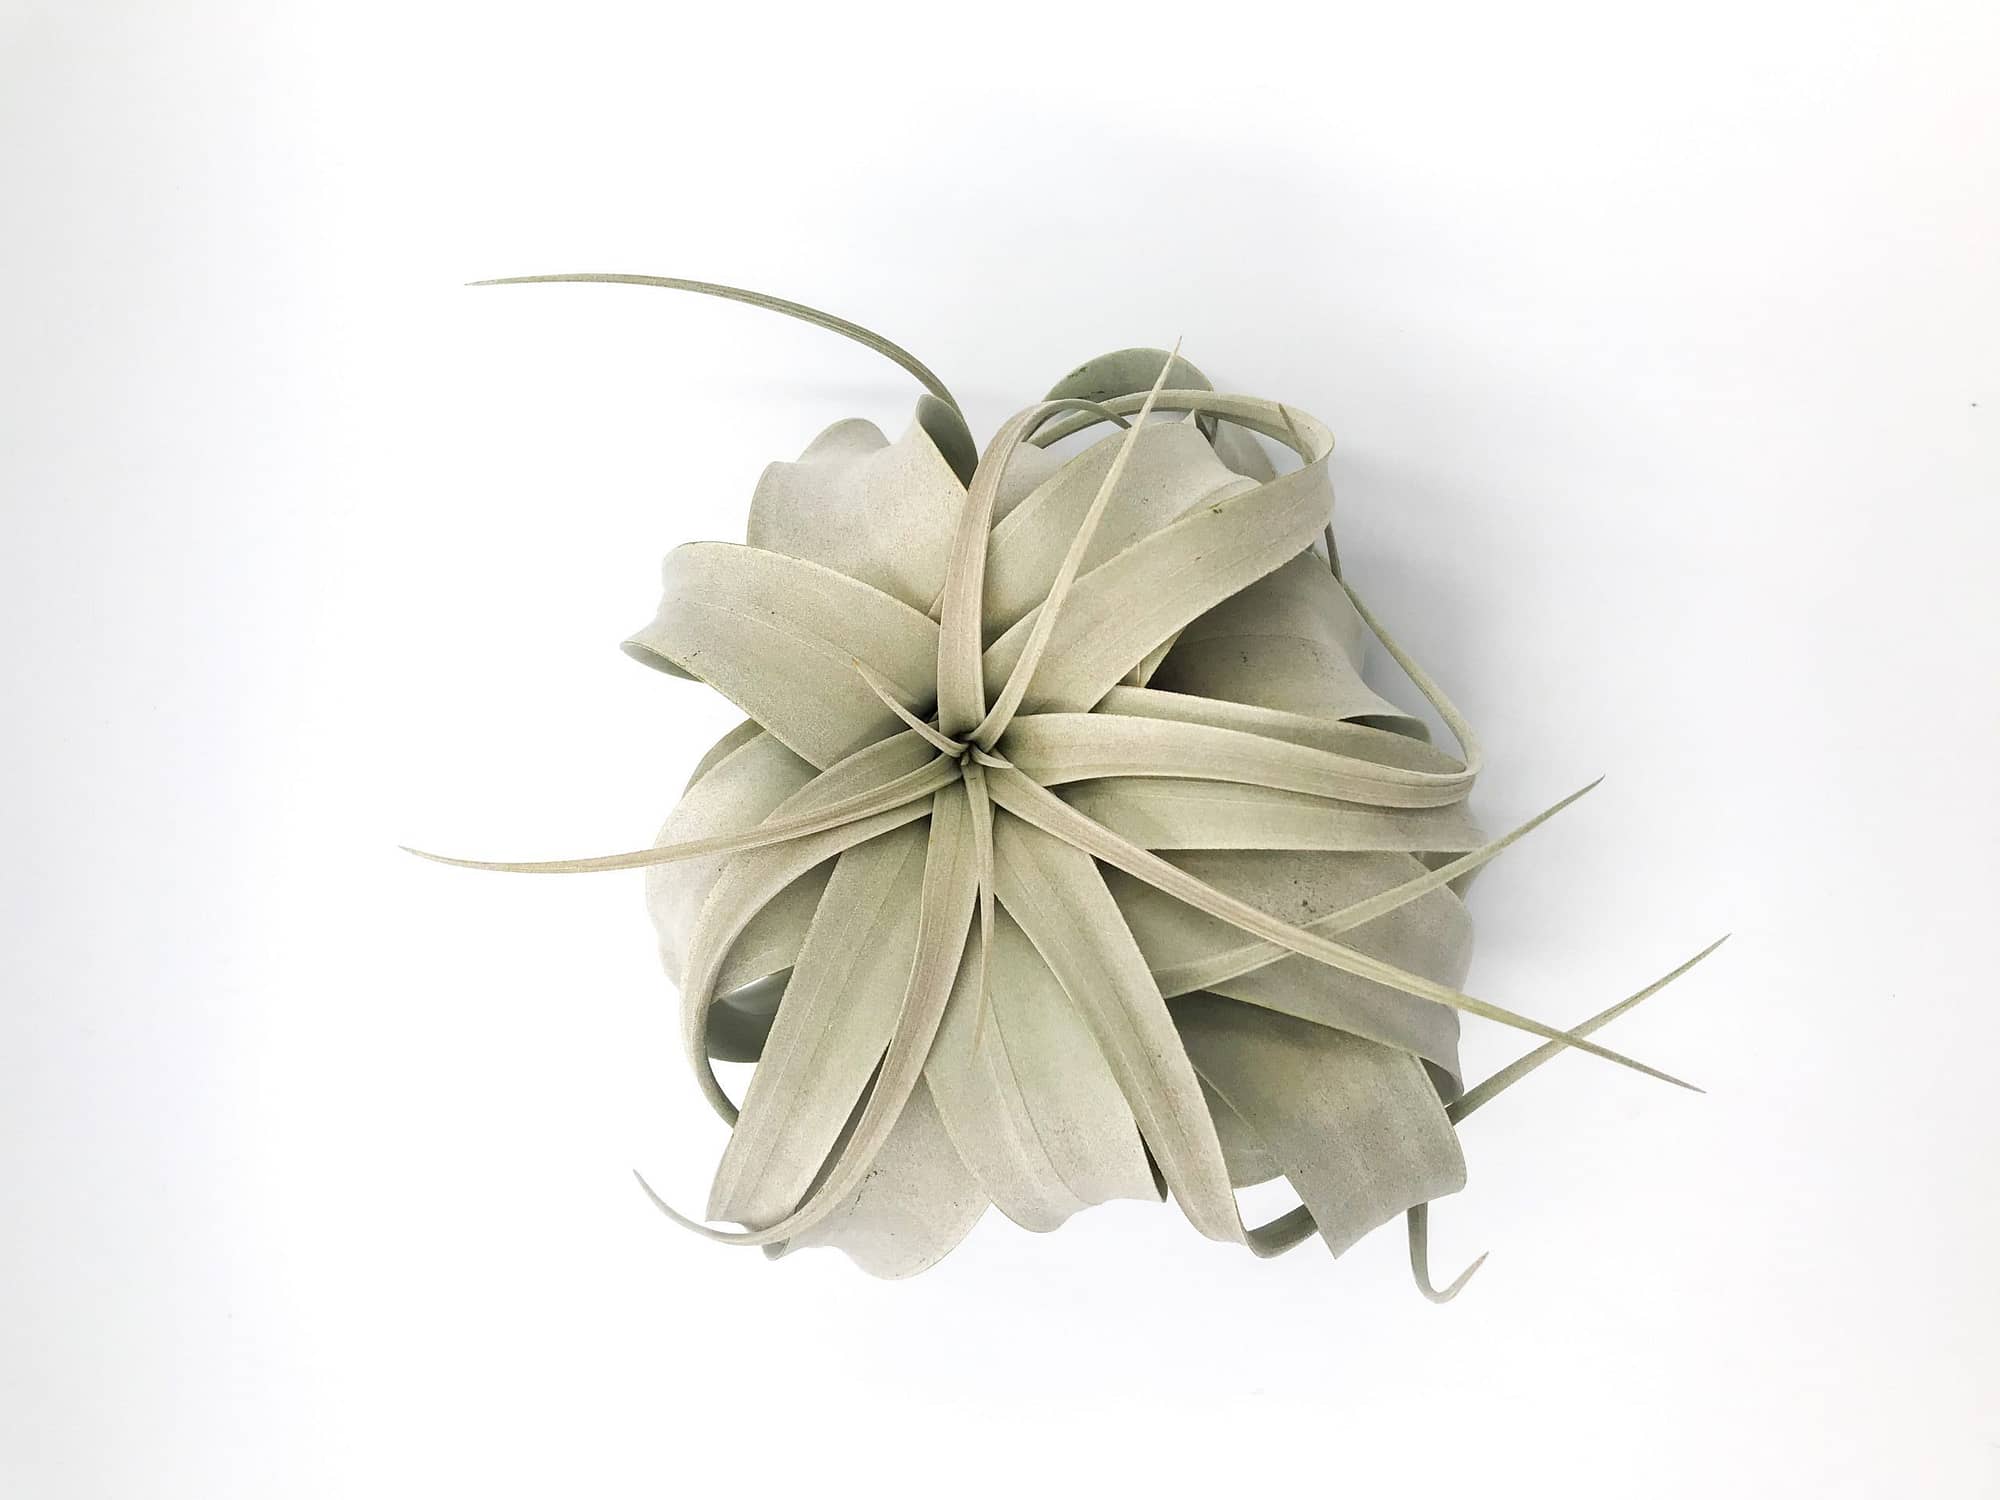 Large air plant also know as Tillandsia xerographica